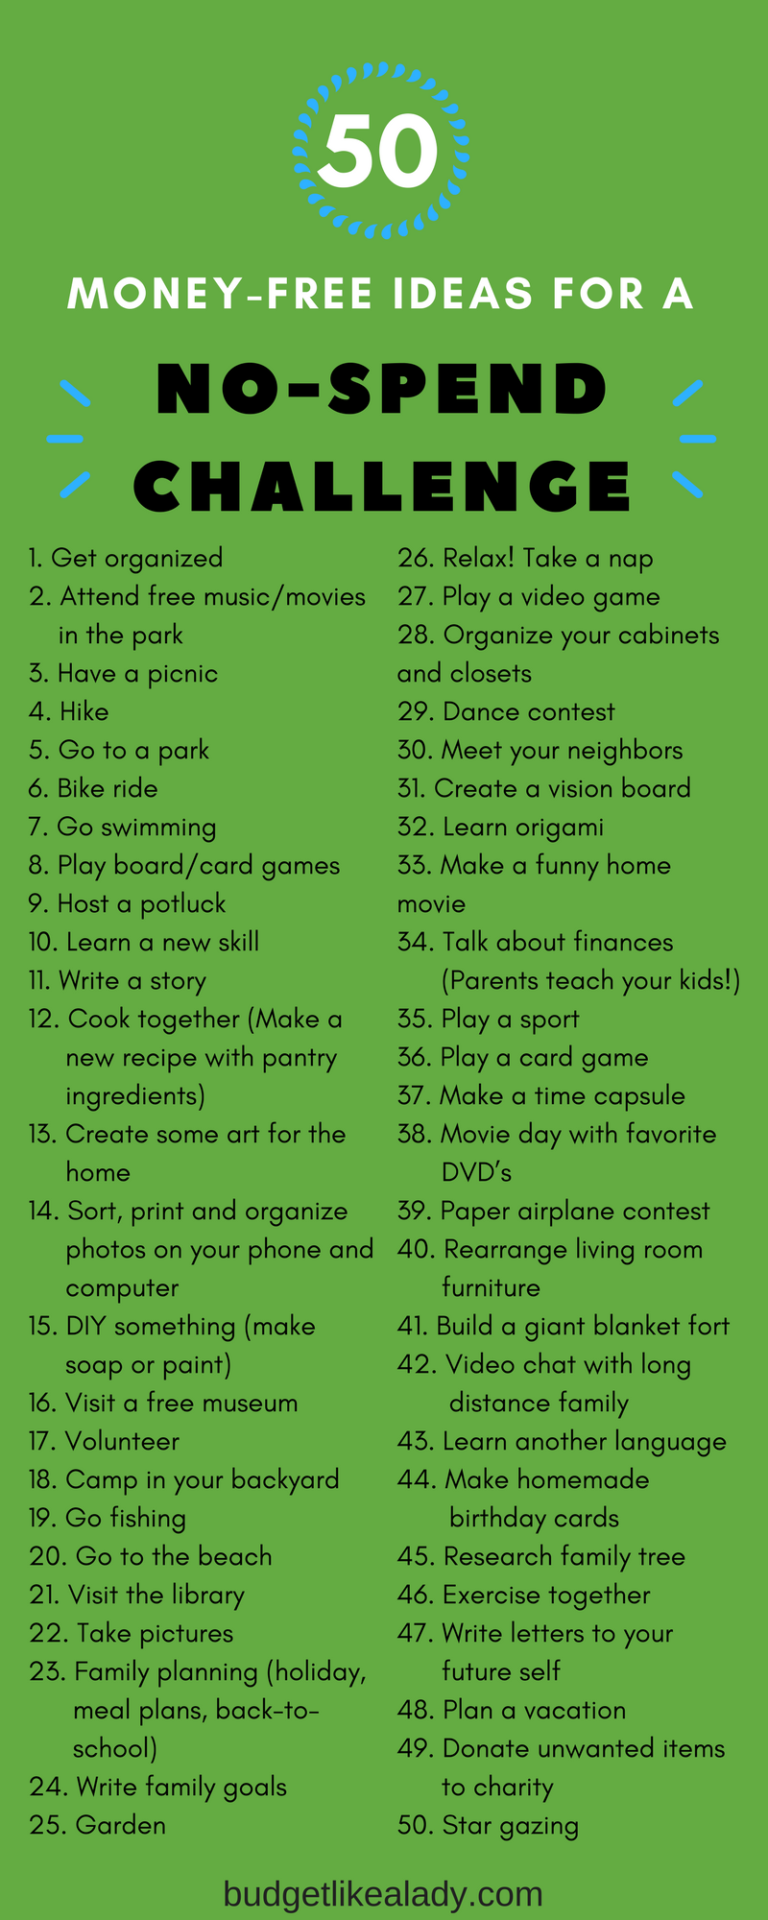 50-money-free-things-to-do-during-a-no-spend-challenge-budget-like-a-lady